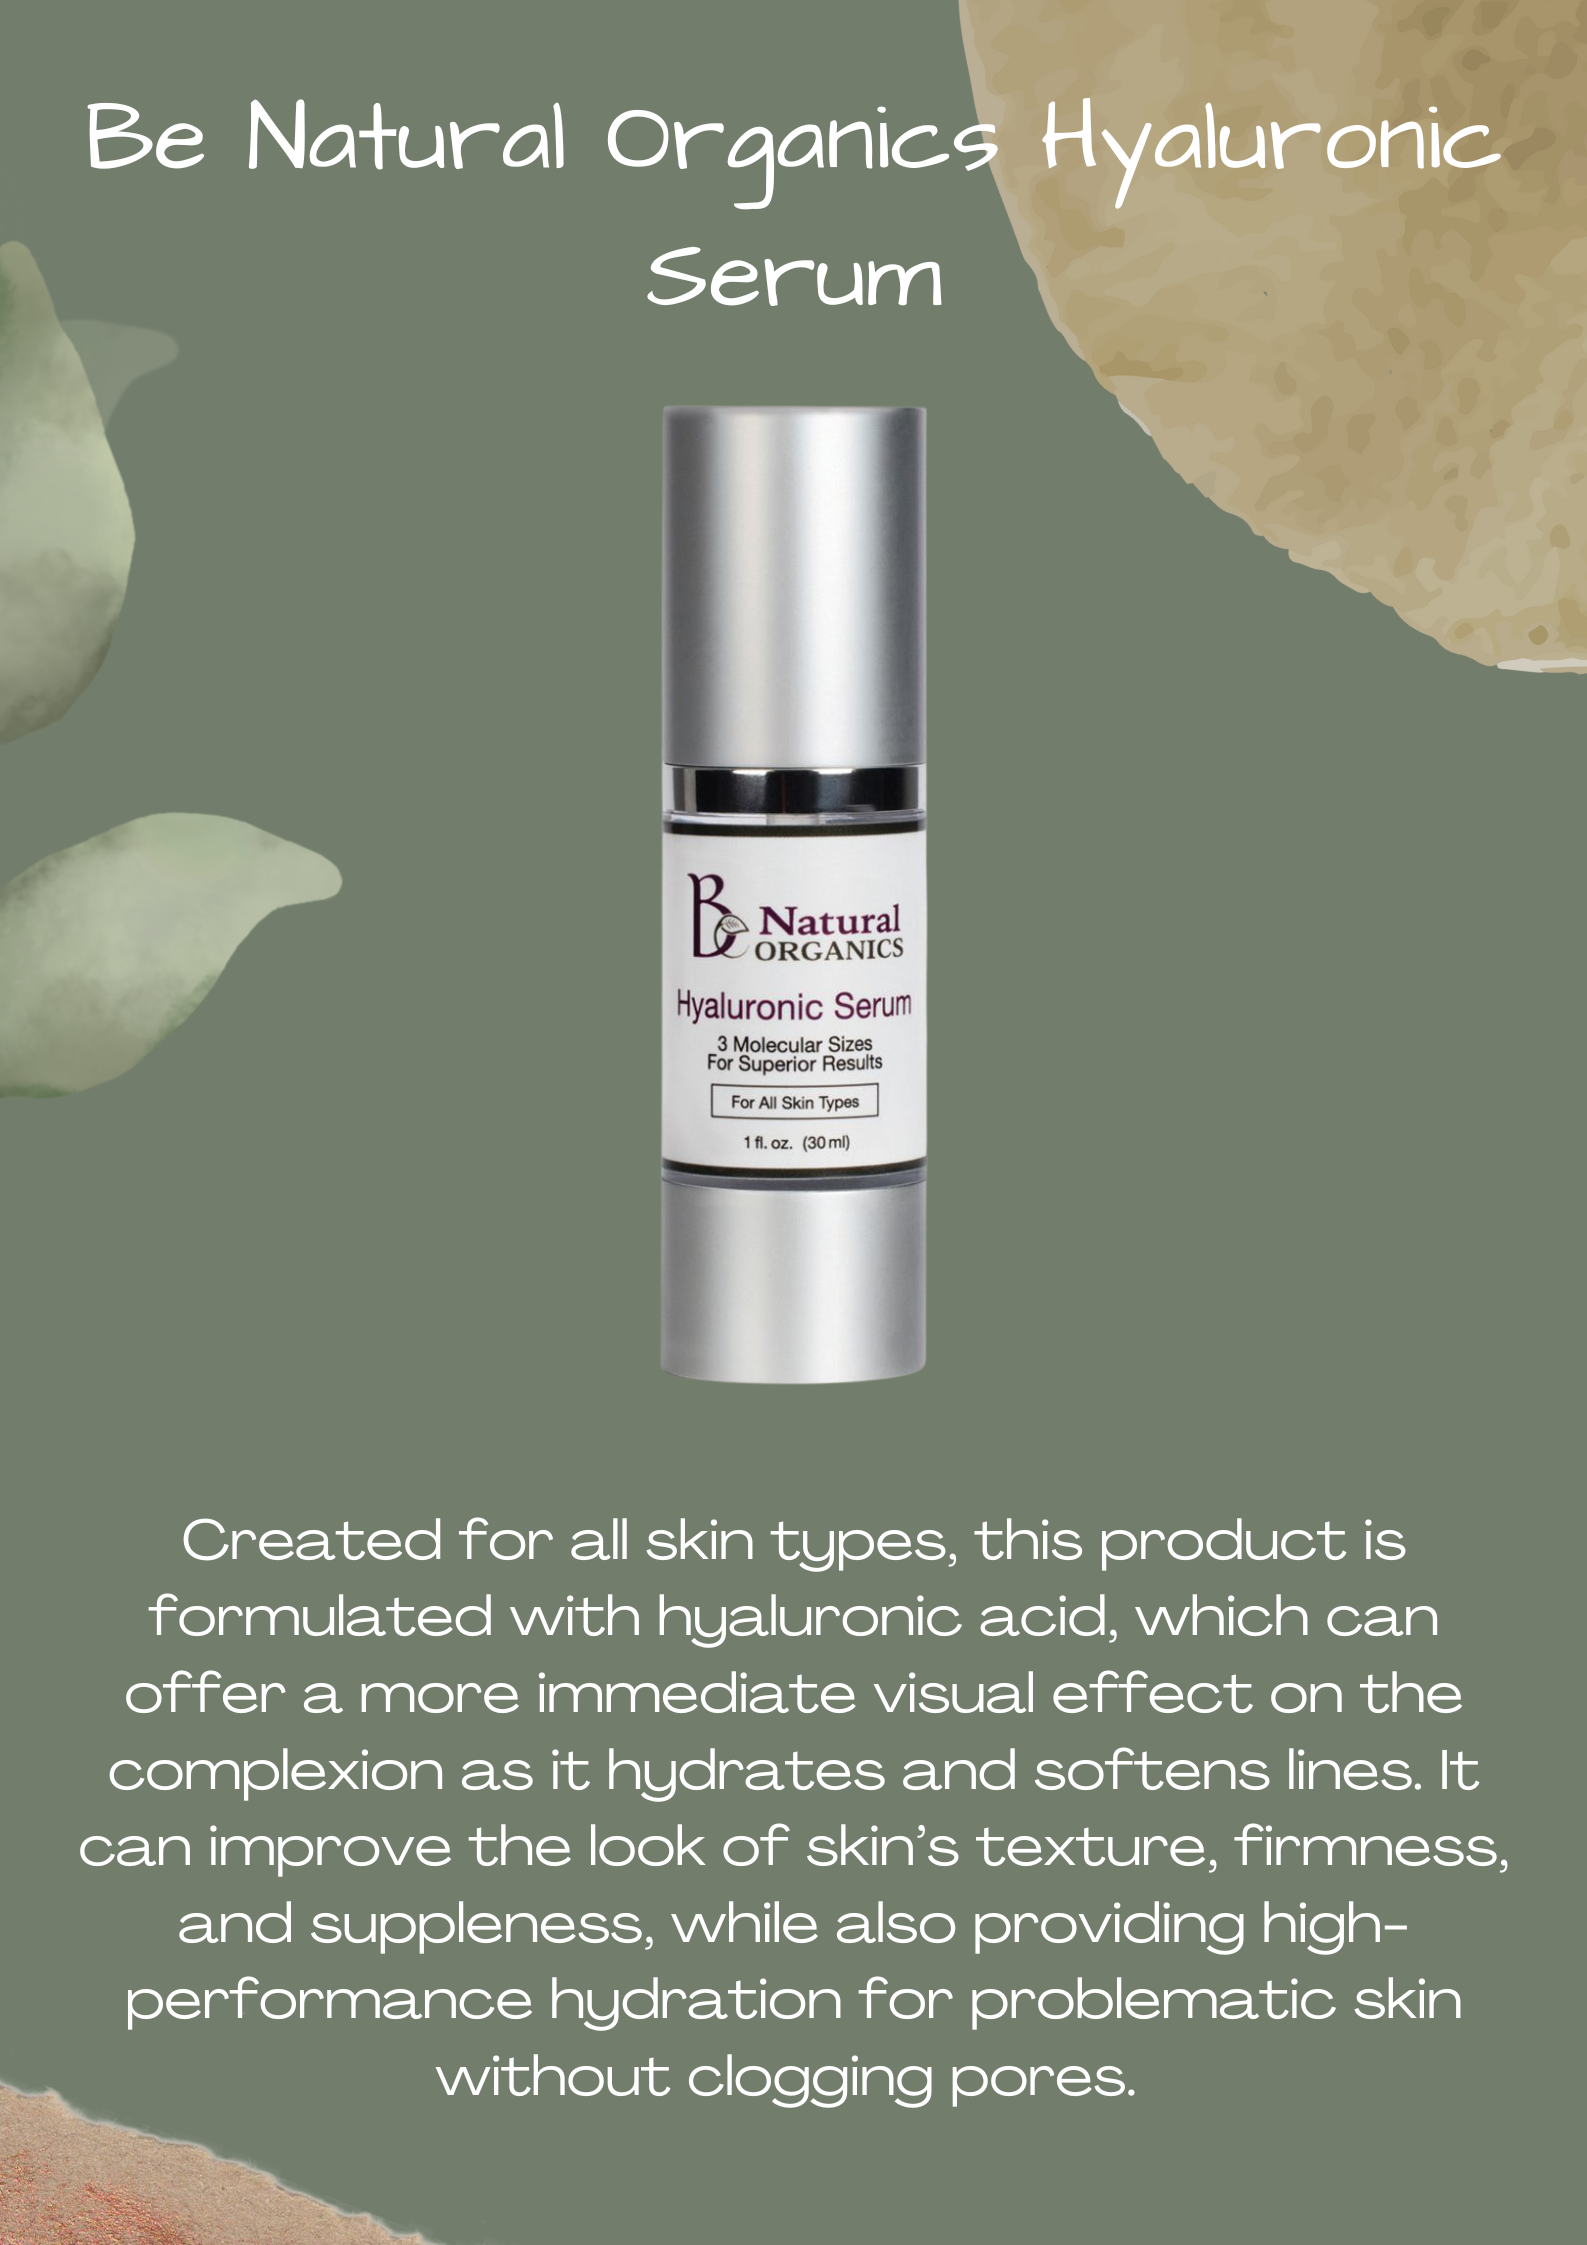 Be Natural Organics Hyaluronic Serum:Created for all skin types, this product is formulated with hyaluronic acid, which can offer a more immediate visual effect on the complexion as it hydrates and softens lines. It can improve the look of skin’s texture, firmness, and suppleness, while also providing high-performance hydration for problematic skin without clogging pores. 